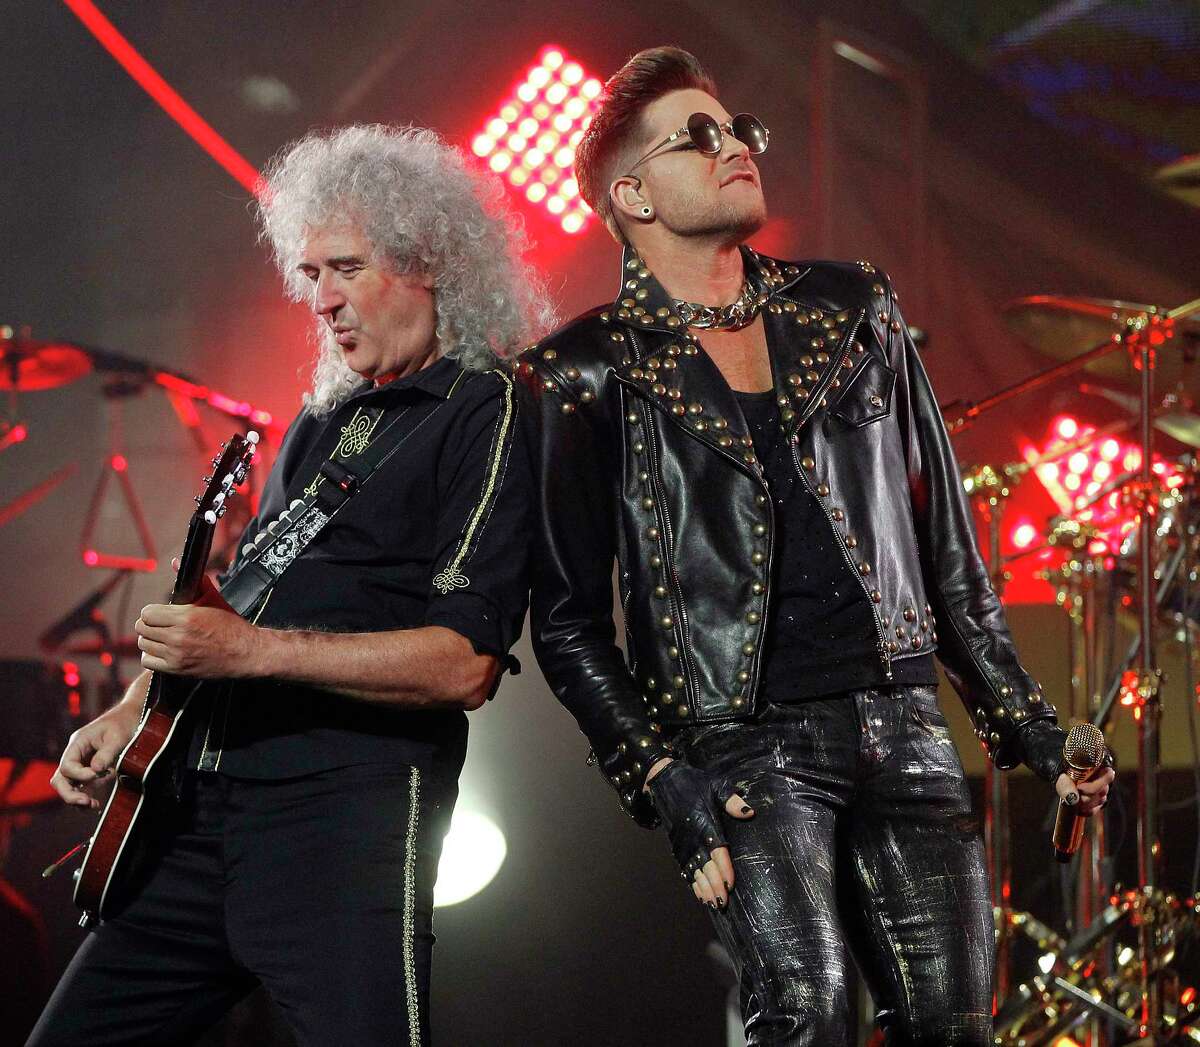 Guitarist Brian May stands next to Adam Lambert as Queen performs at the Toyota Center, Wednesday, July 9, 2014, in Houston. ( Karen Warren / Houston Chronicle )